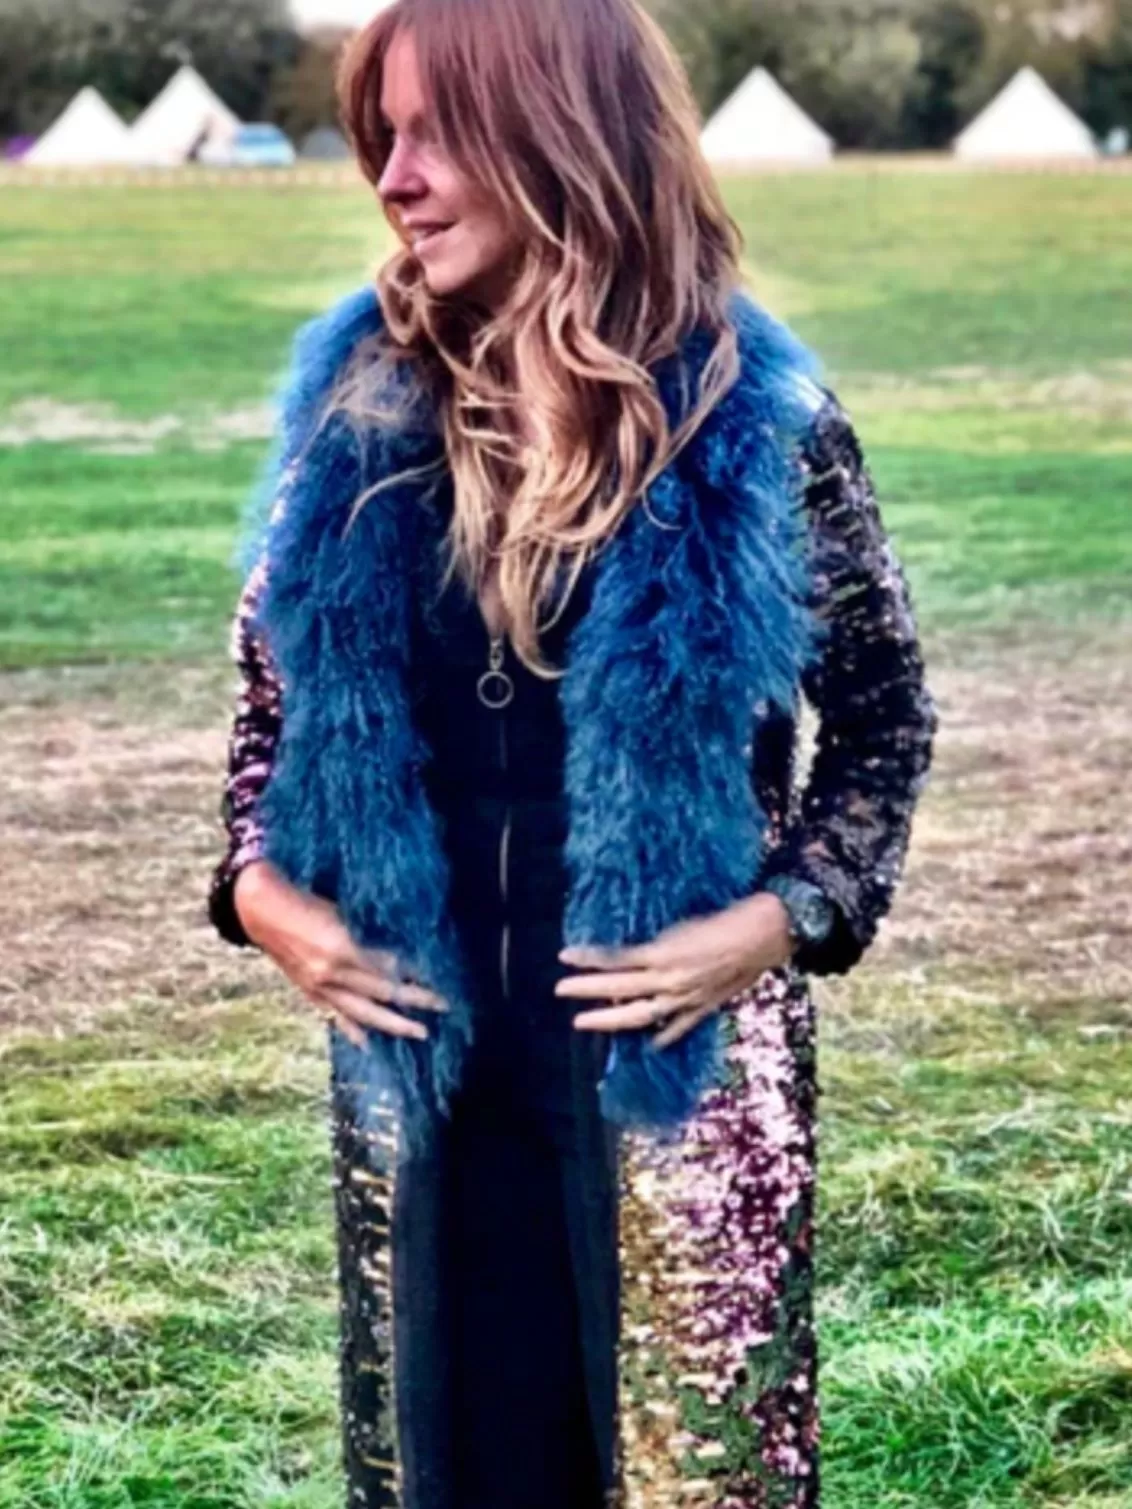 Found of Rock The Jumpsuit Rachel wearings a blue fur collared sparkling long coat in a field